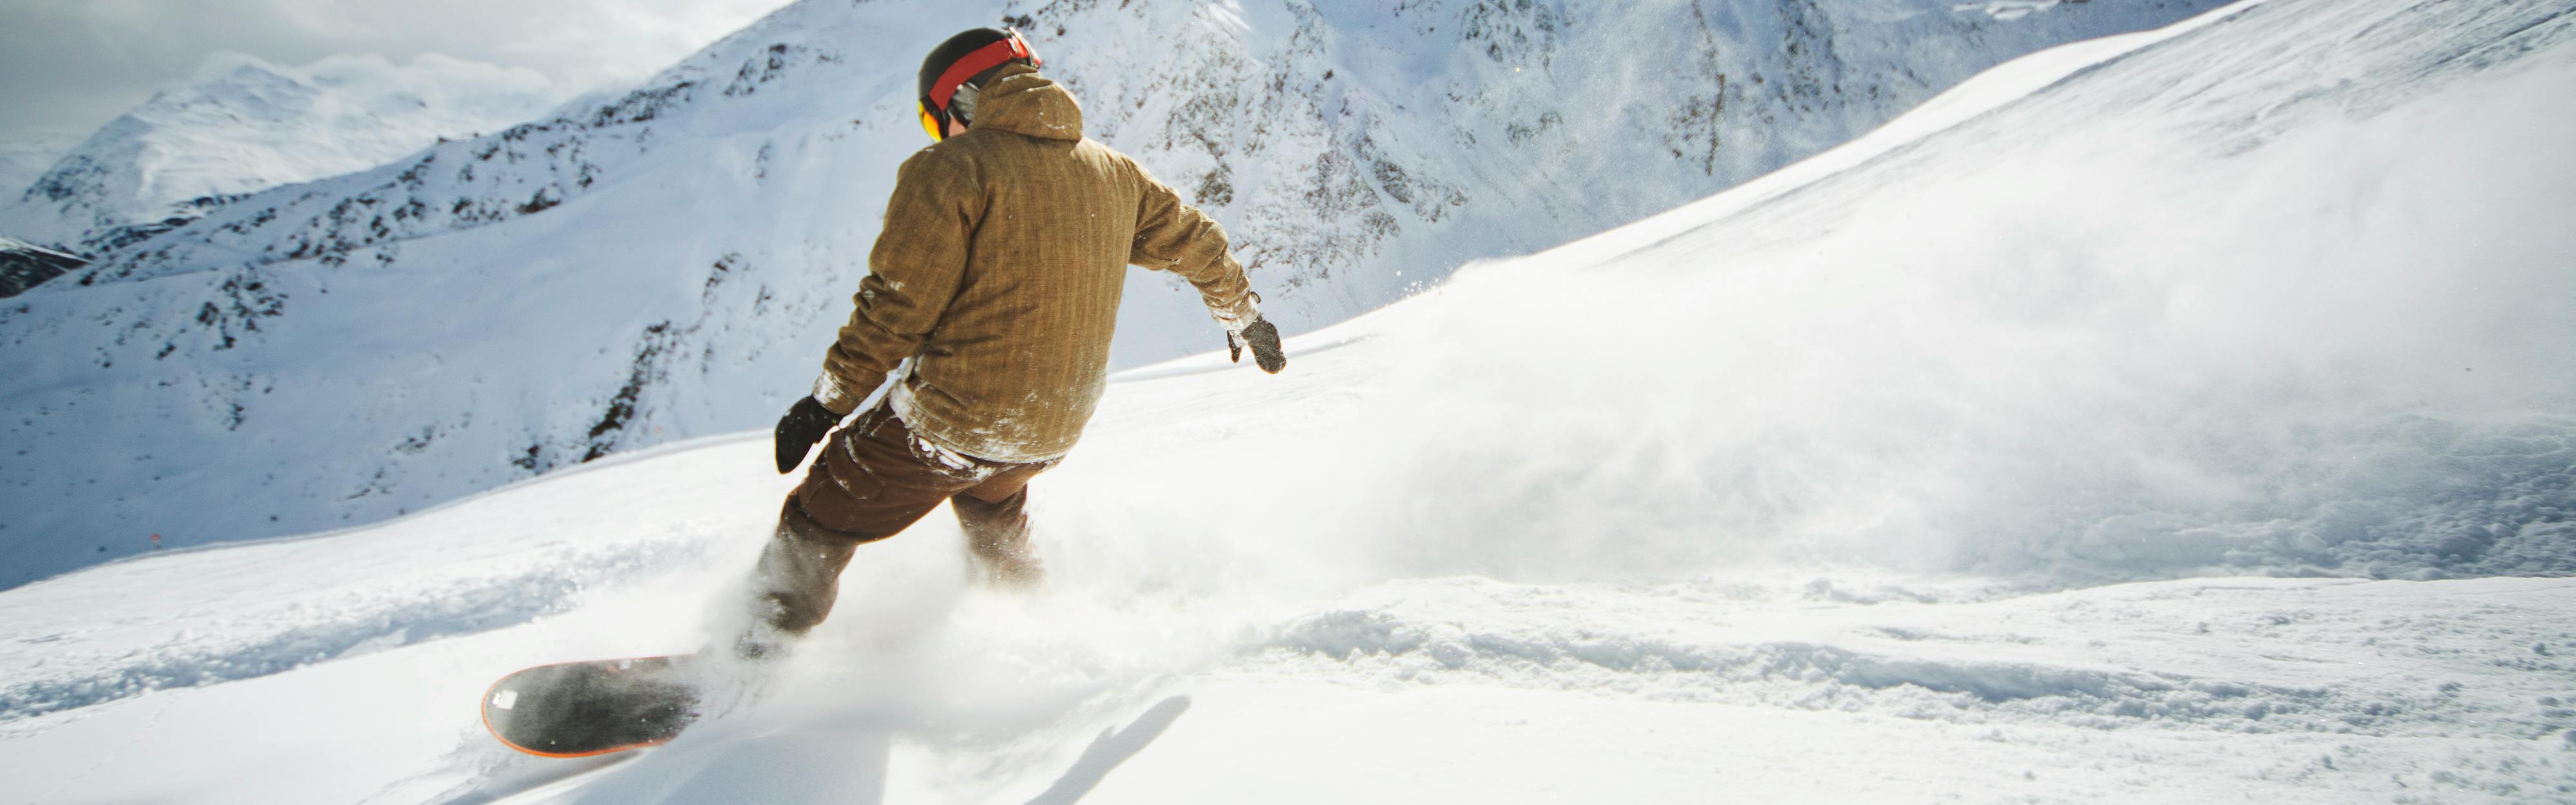 A snowboarder in a beige jacket makes their way down the mountain with a cloud of powder behind them